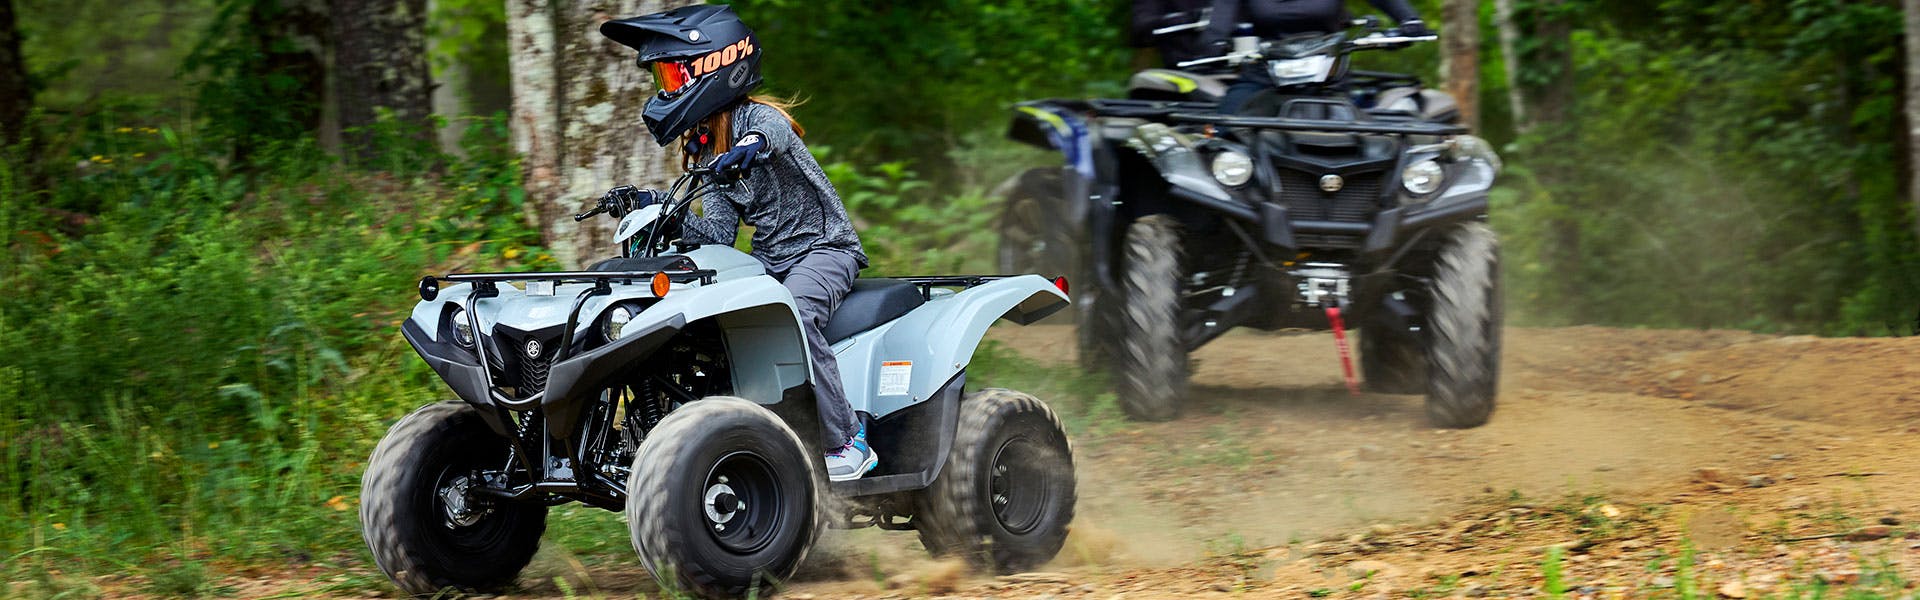 Yamaha Grizzly 90 in armour grey colour in action on off road track